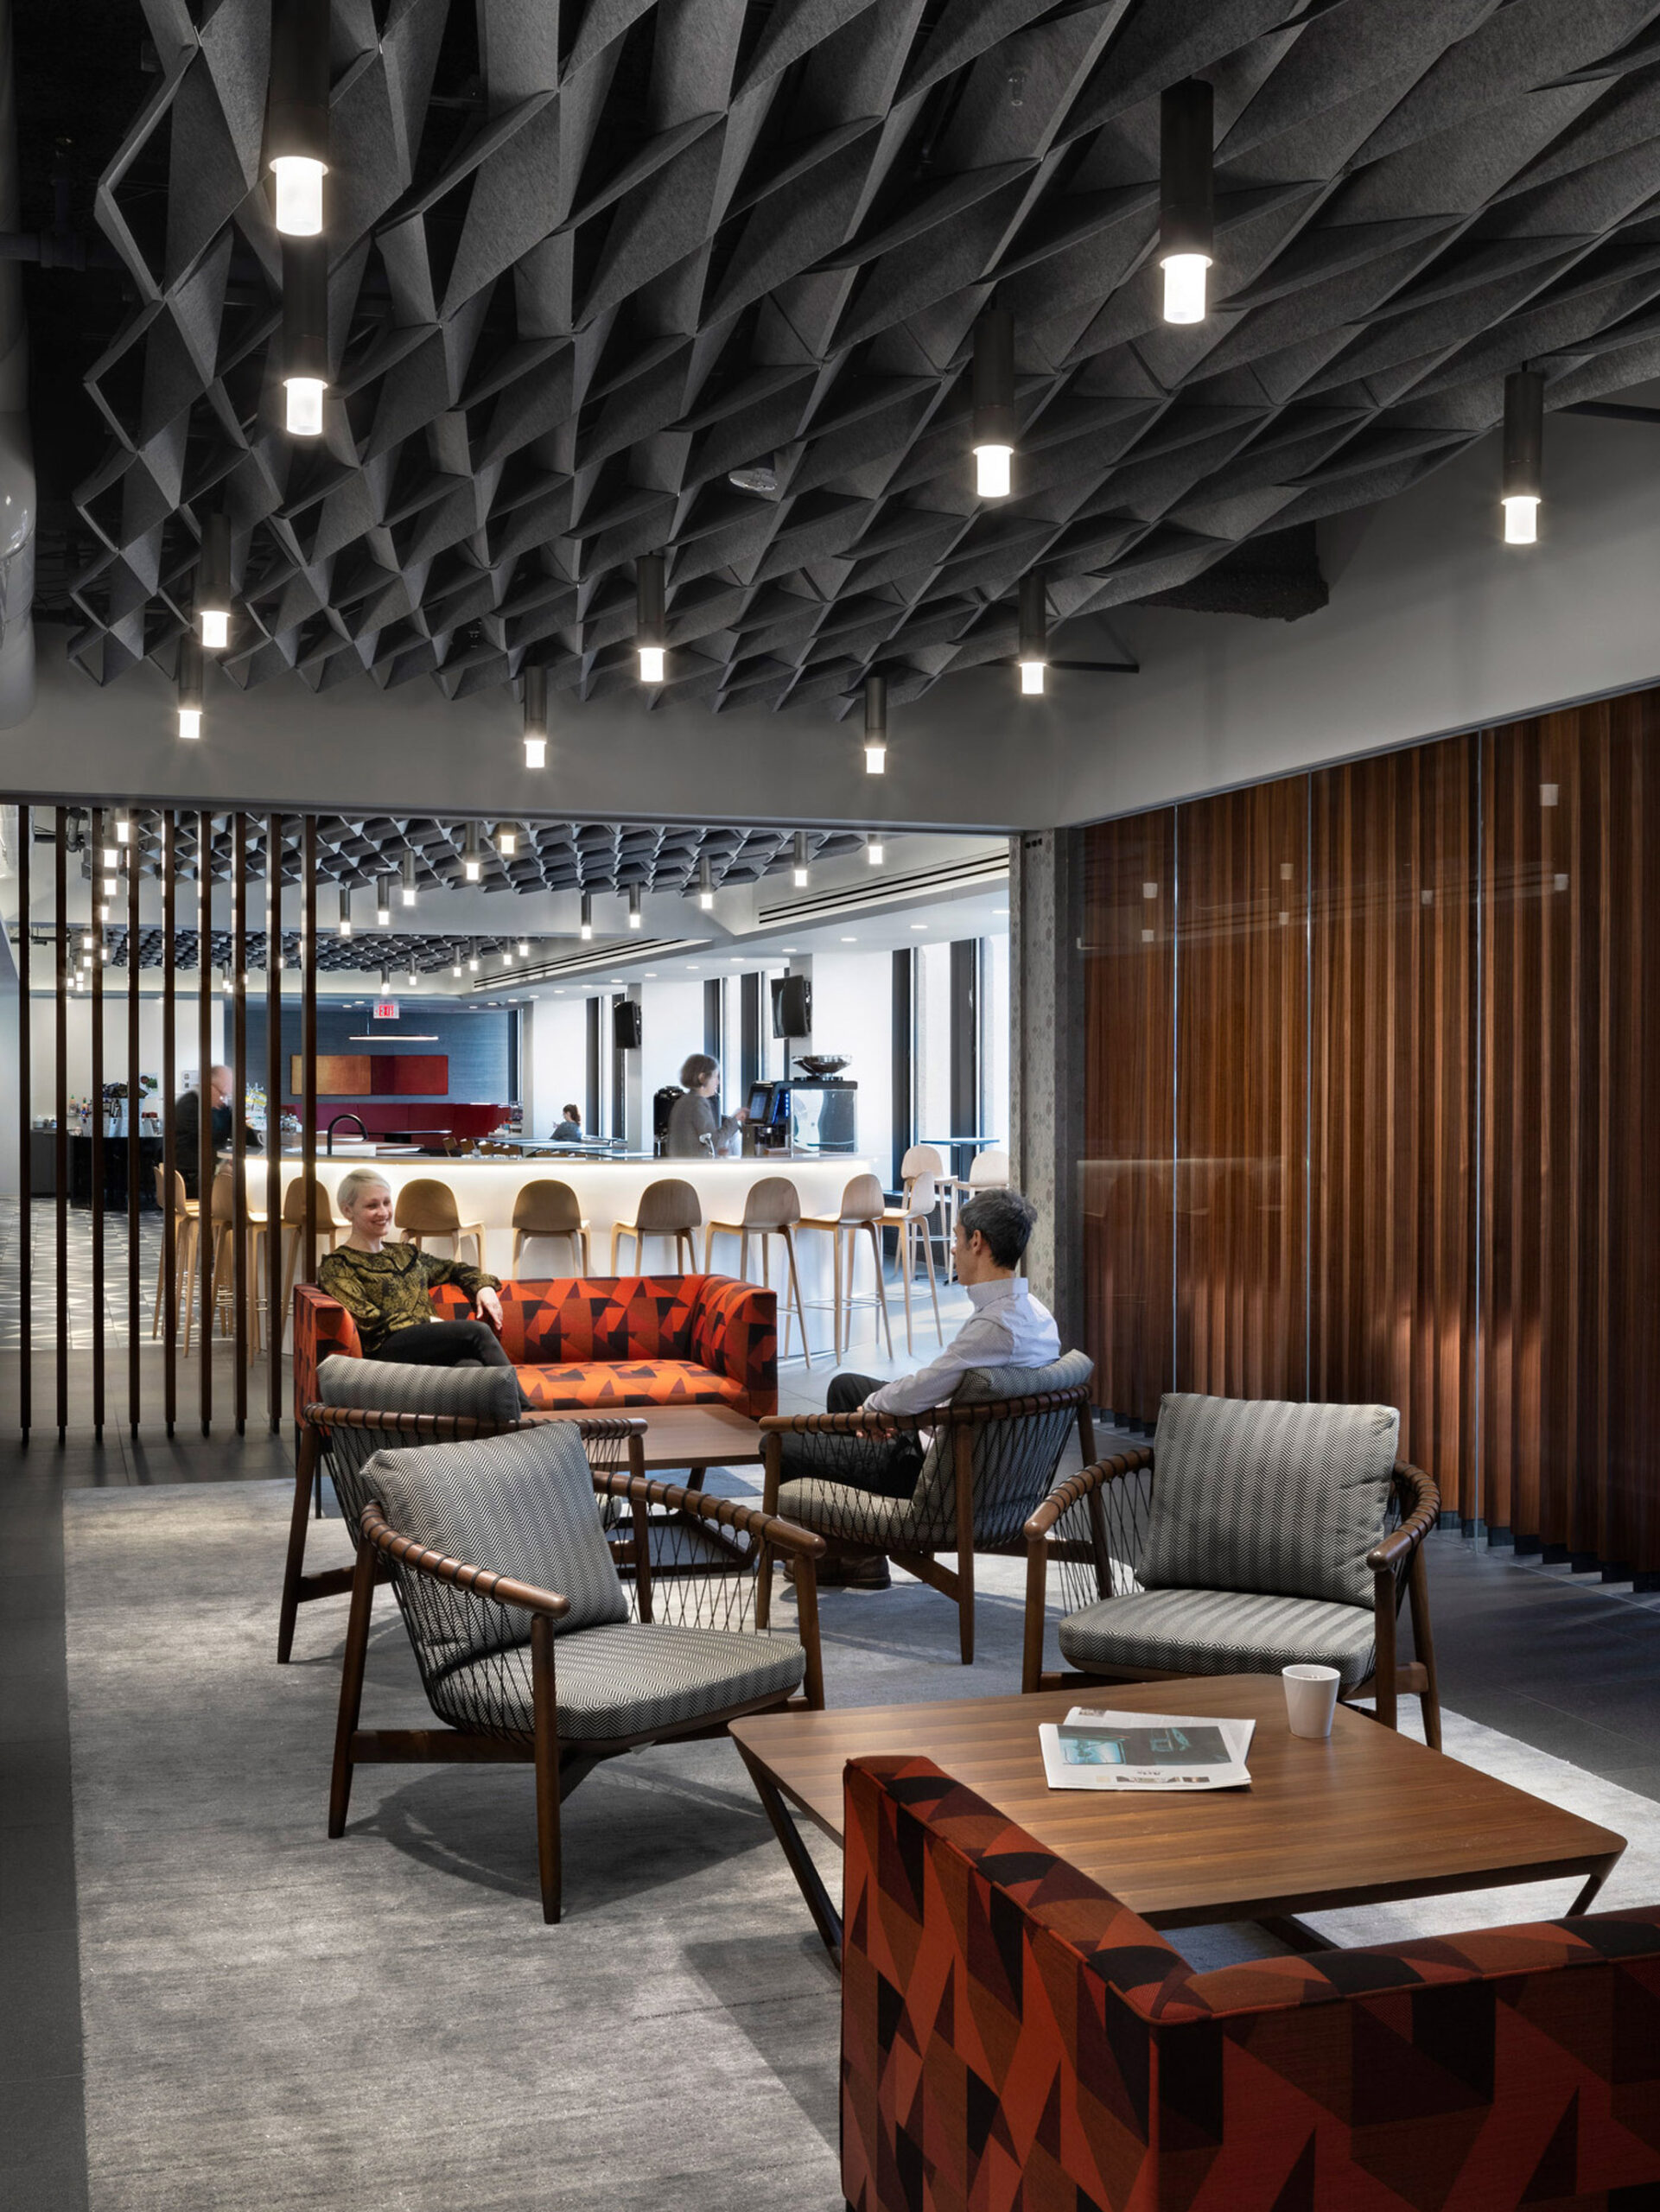 Modern office lounge with geometric acoustic ceiling panels, pendant lighting, and a mix of wooden elements and textured upholstered seating, fostering a contemporary and inviting ambiance.